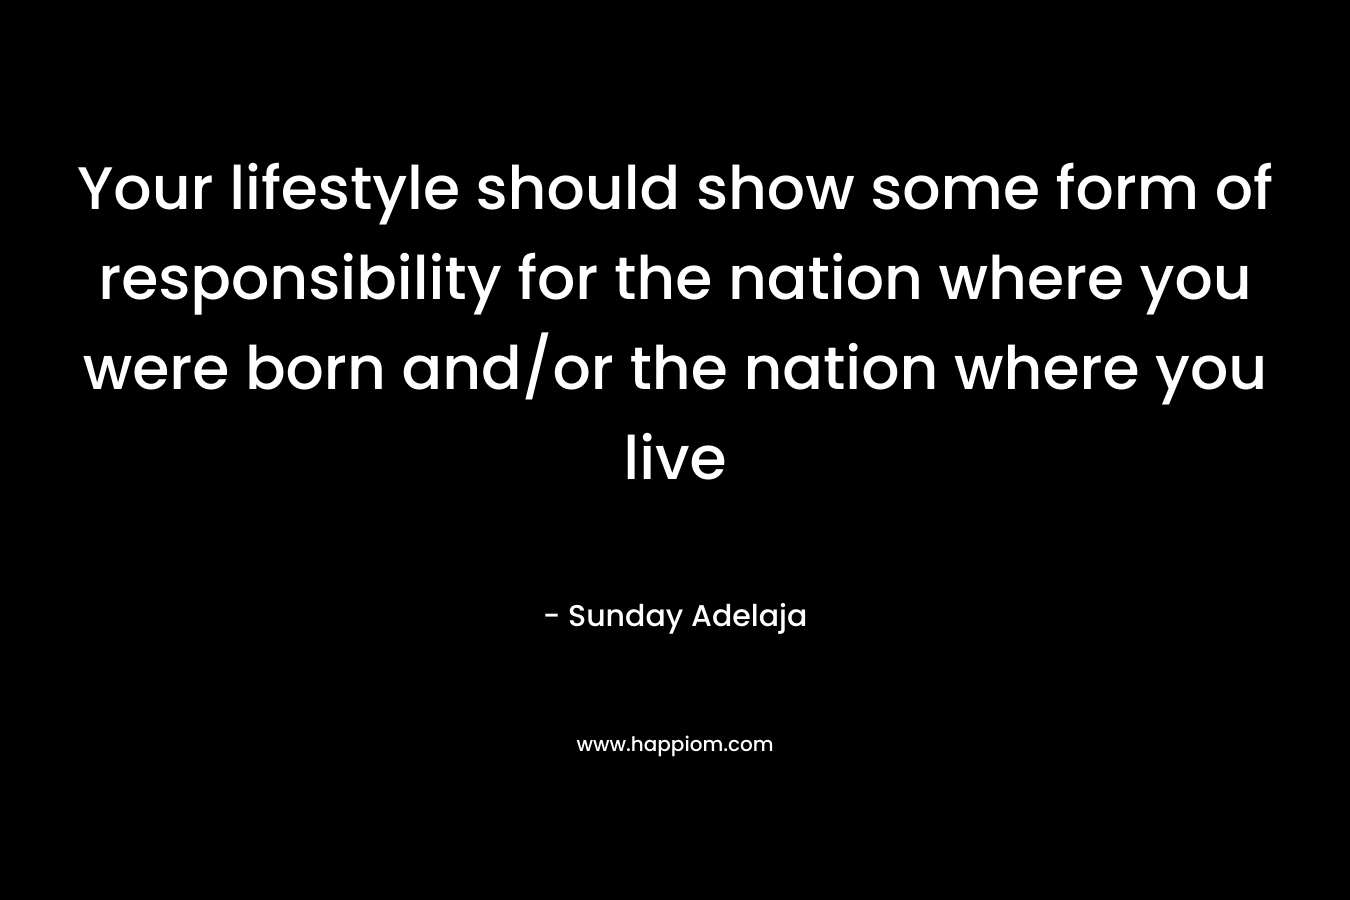 Your lifestyle should show some form of responsibility for the nation where you were born and/or the nation where you live